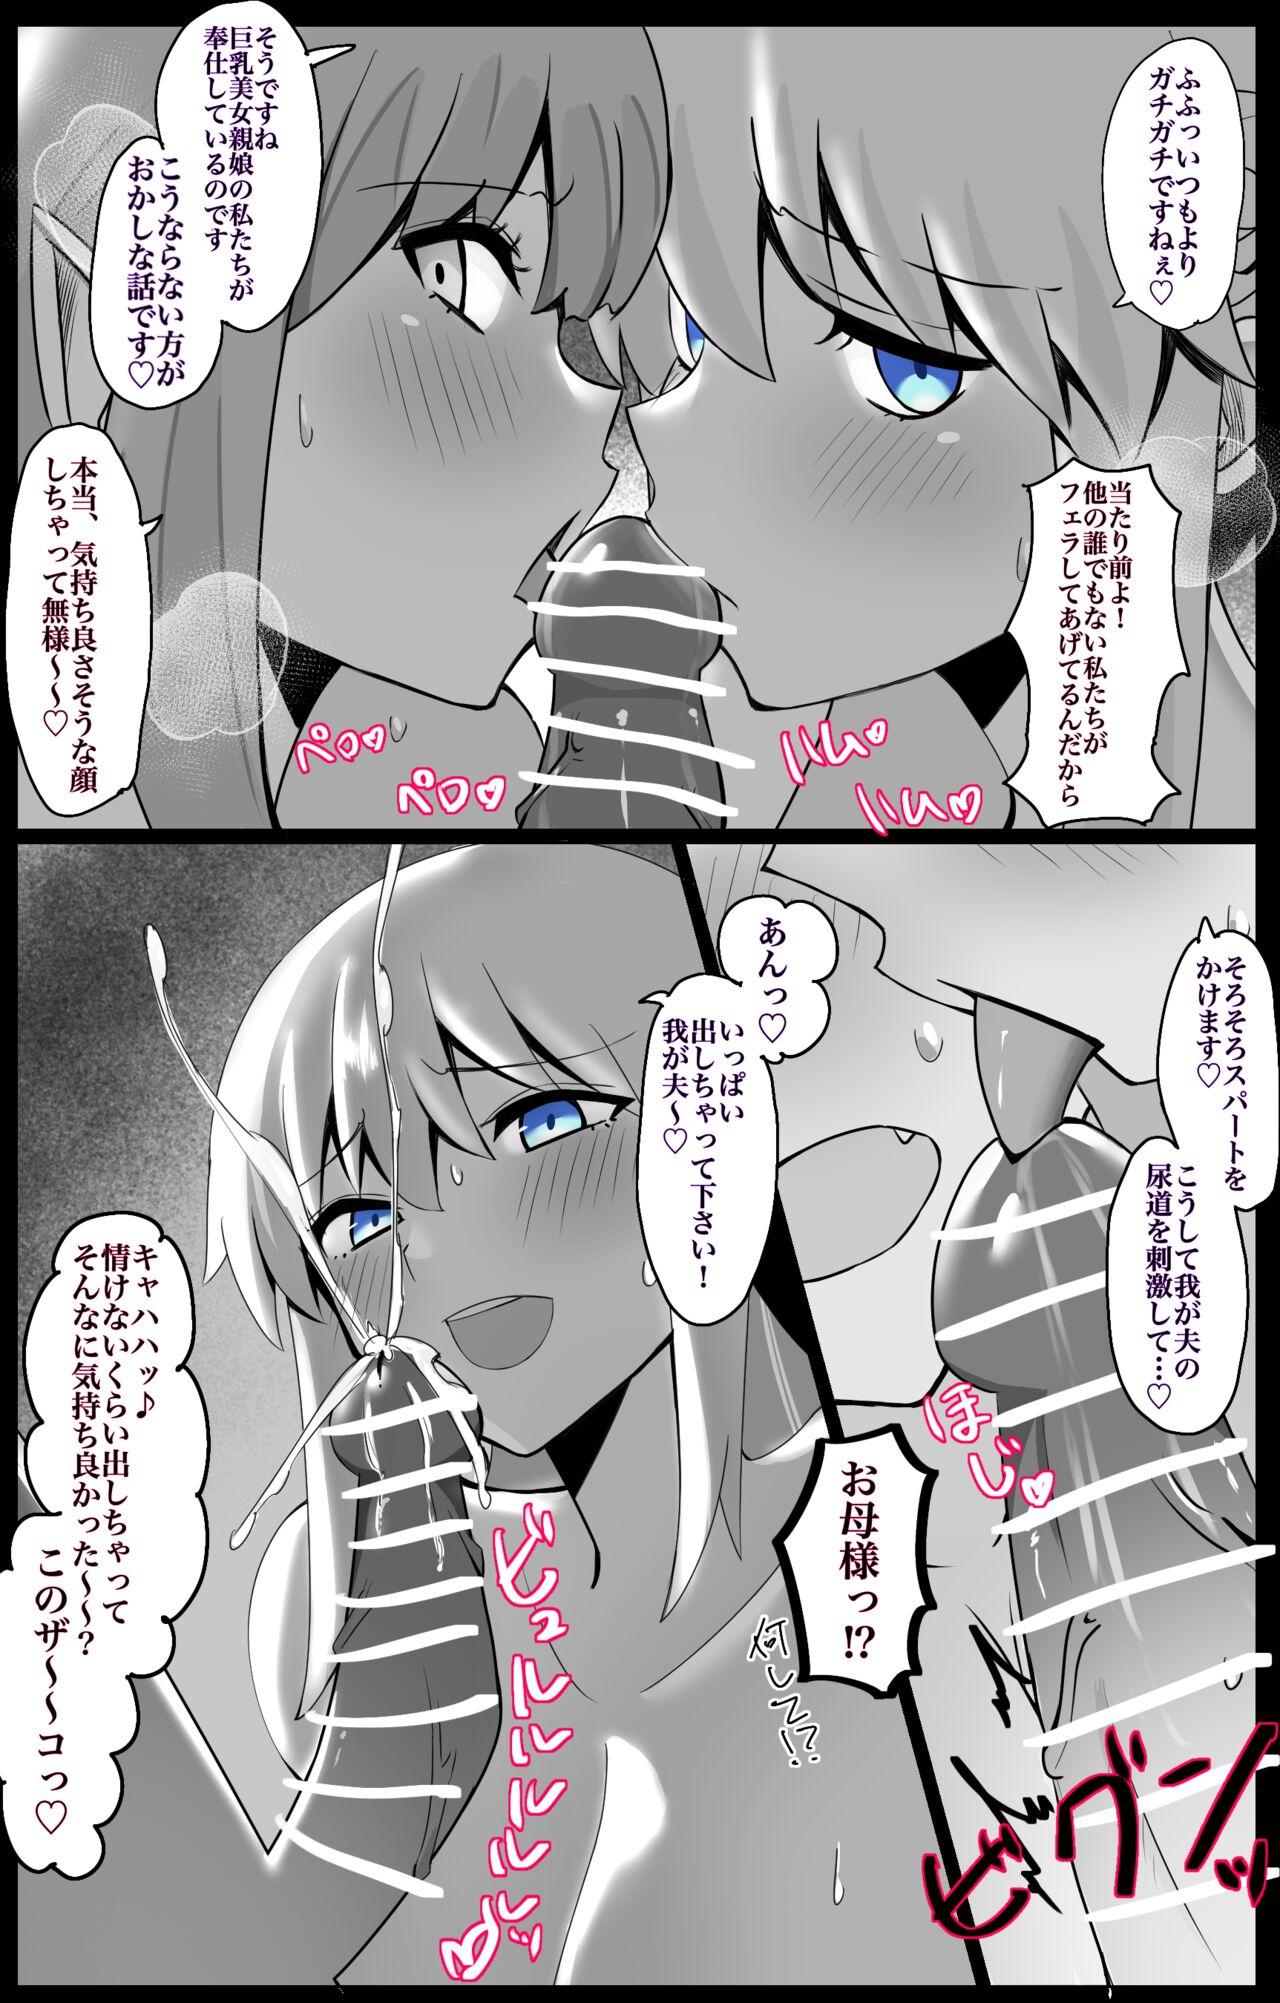 Hard MorTri Oyakodon - Fate grand order Jerkoff - Page 9